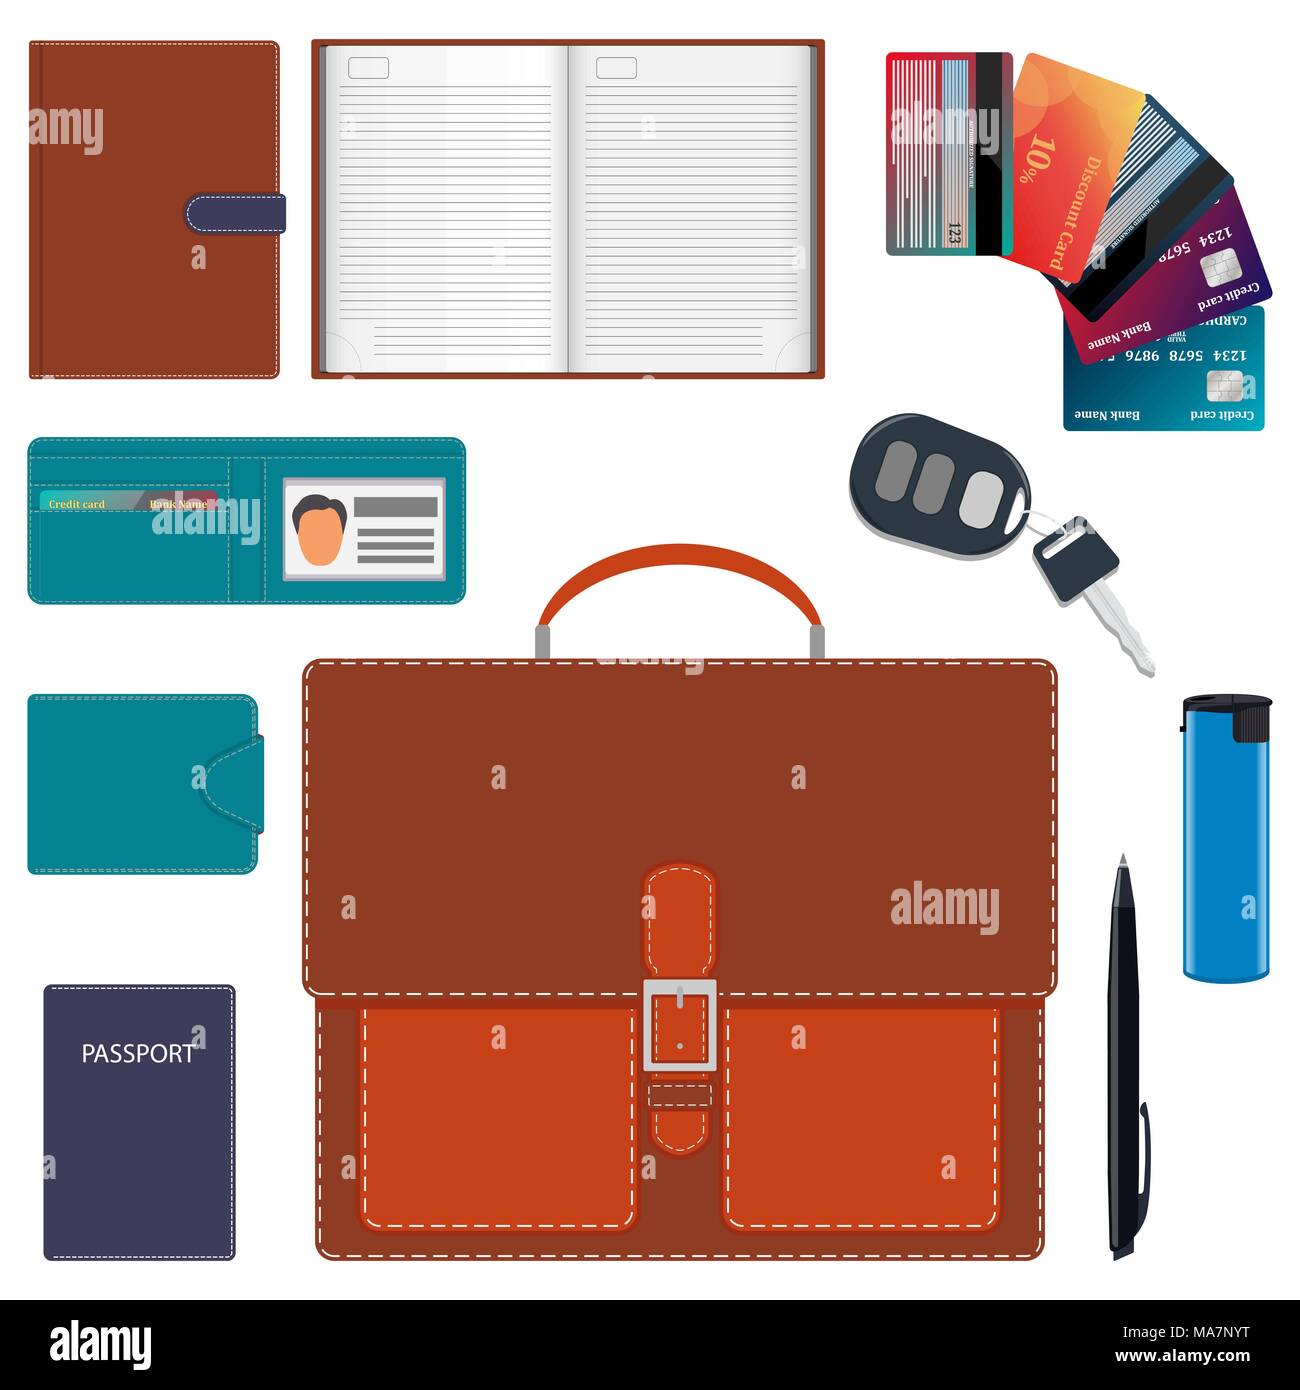 Men s briefcase and its contents. Men s bag and a common set of objects carry with them. Diary, wallet, bank cards, car keys, passport, lighter, pen.  Stock Vector